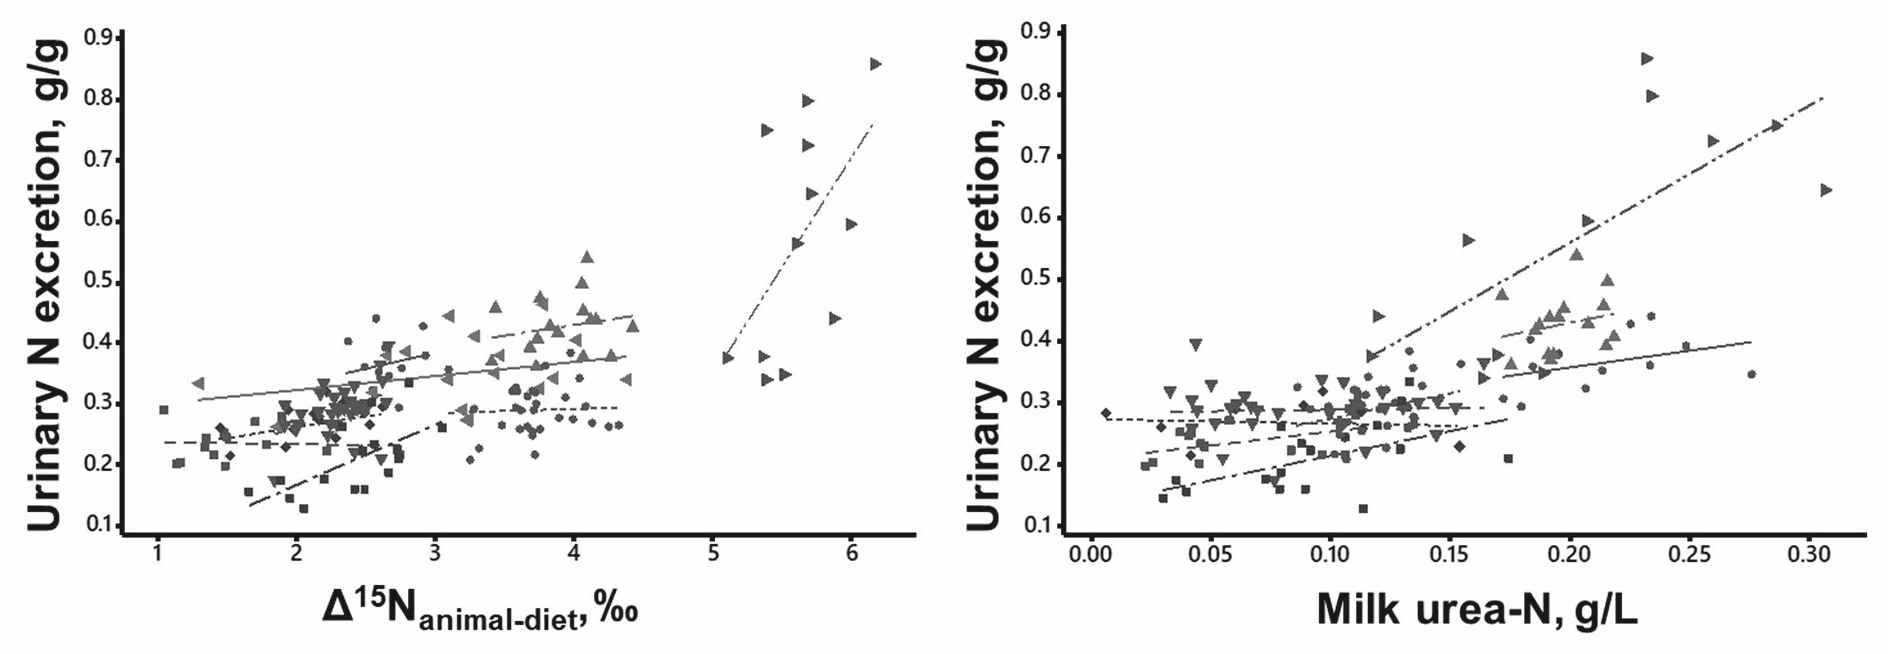 Figure 5: Relation between urinary nitrogen excretion measured by gold standard methods using metabolic cages and either natural 15N enrichment of animal proteins over the diet (Δ15Nanimal-diet) or milk urea nitrogen concentration.